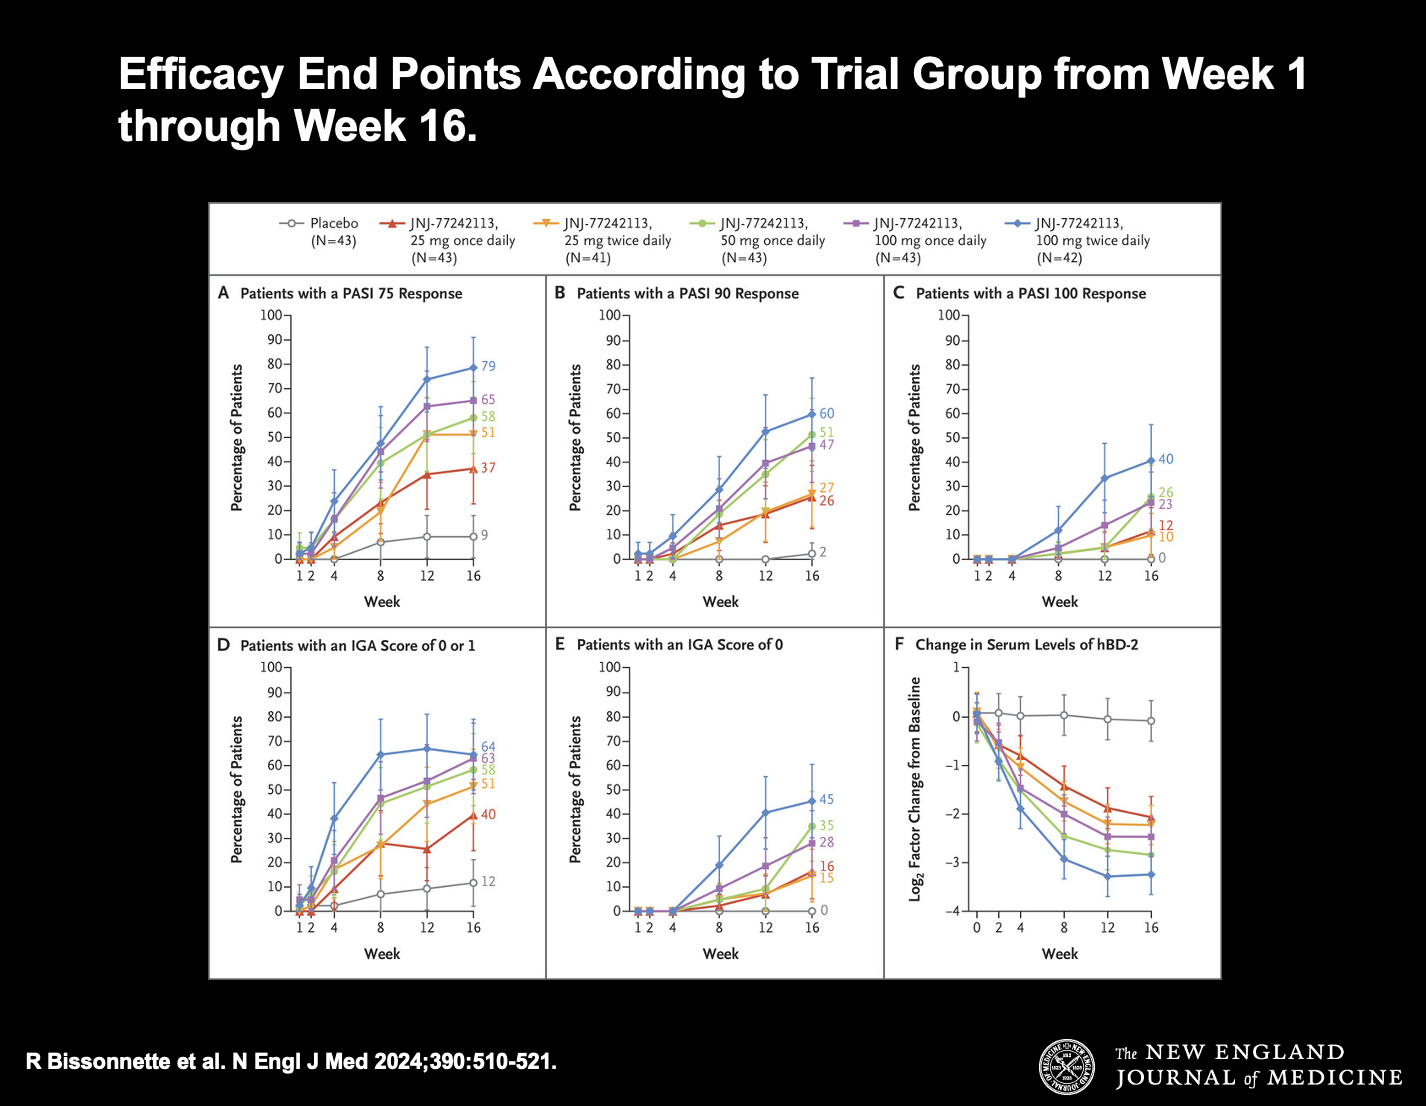 Figure 1. Efficacy End Points According to Trial Group from Week 1 through Week 16.  Scores on the Psoriasis Area and Severity Index (PASI) range from 0 to 72, with higher scores indicating greater extent or severity of psoriasis. PASI 75 response, PASI 90 response, and PASI 100 response refer to reductions from baseline of at least 75%, 90%, and 100%, respectively, in the PASI score. Scores on the Investigator’s Global Assessment (IGA) range from 0 (clear skin) to 4 (severe disease); a score of 1 indicates minimal disease. 𝙸 bars denote 95% confidence intervals. For serum levels of human β-defensin 2 (hBD-2), 𝙸 bars indicate linear mixed-effect model–based 95% confidence intervals. The widths of the confidence intervals have not been adjusted for multiplicity and should not be used to infer definitive effects of JNJ-77242113 for the secondary end points.  CREDIT: New England Journal of Medicine